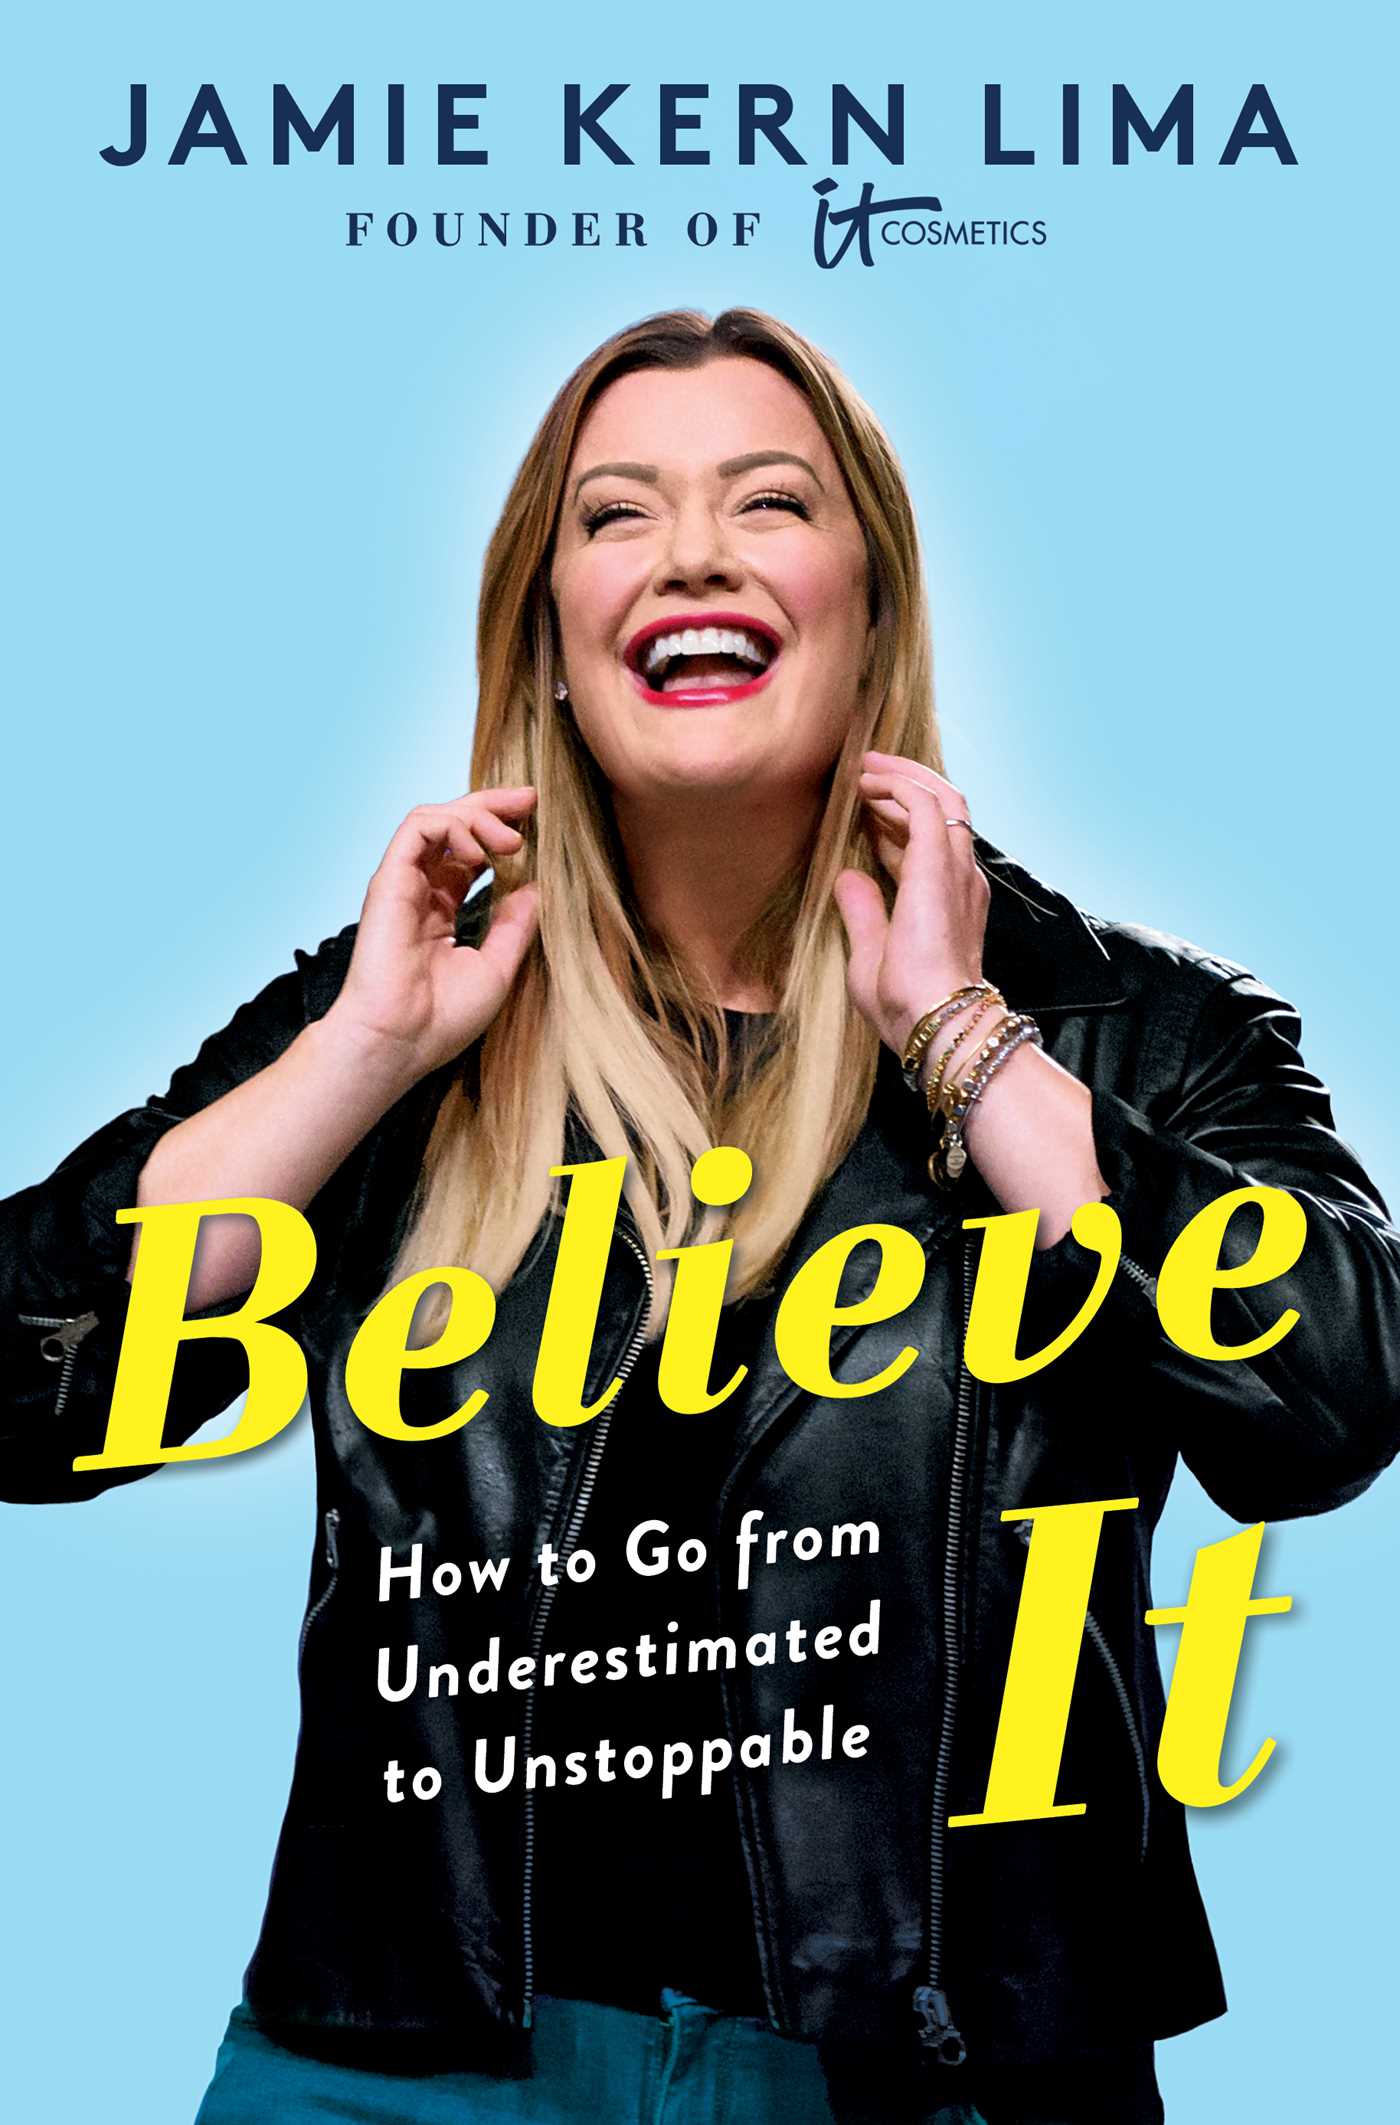 [EPUB] Believe It: How to Go from Underestimated to Unstoppable by Jamie Kern Lima